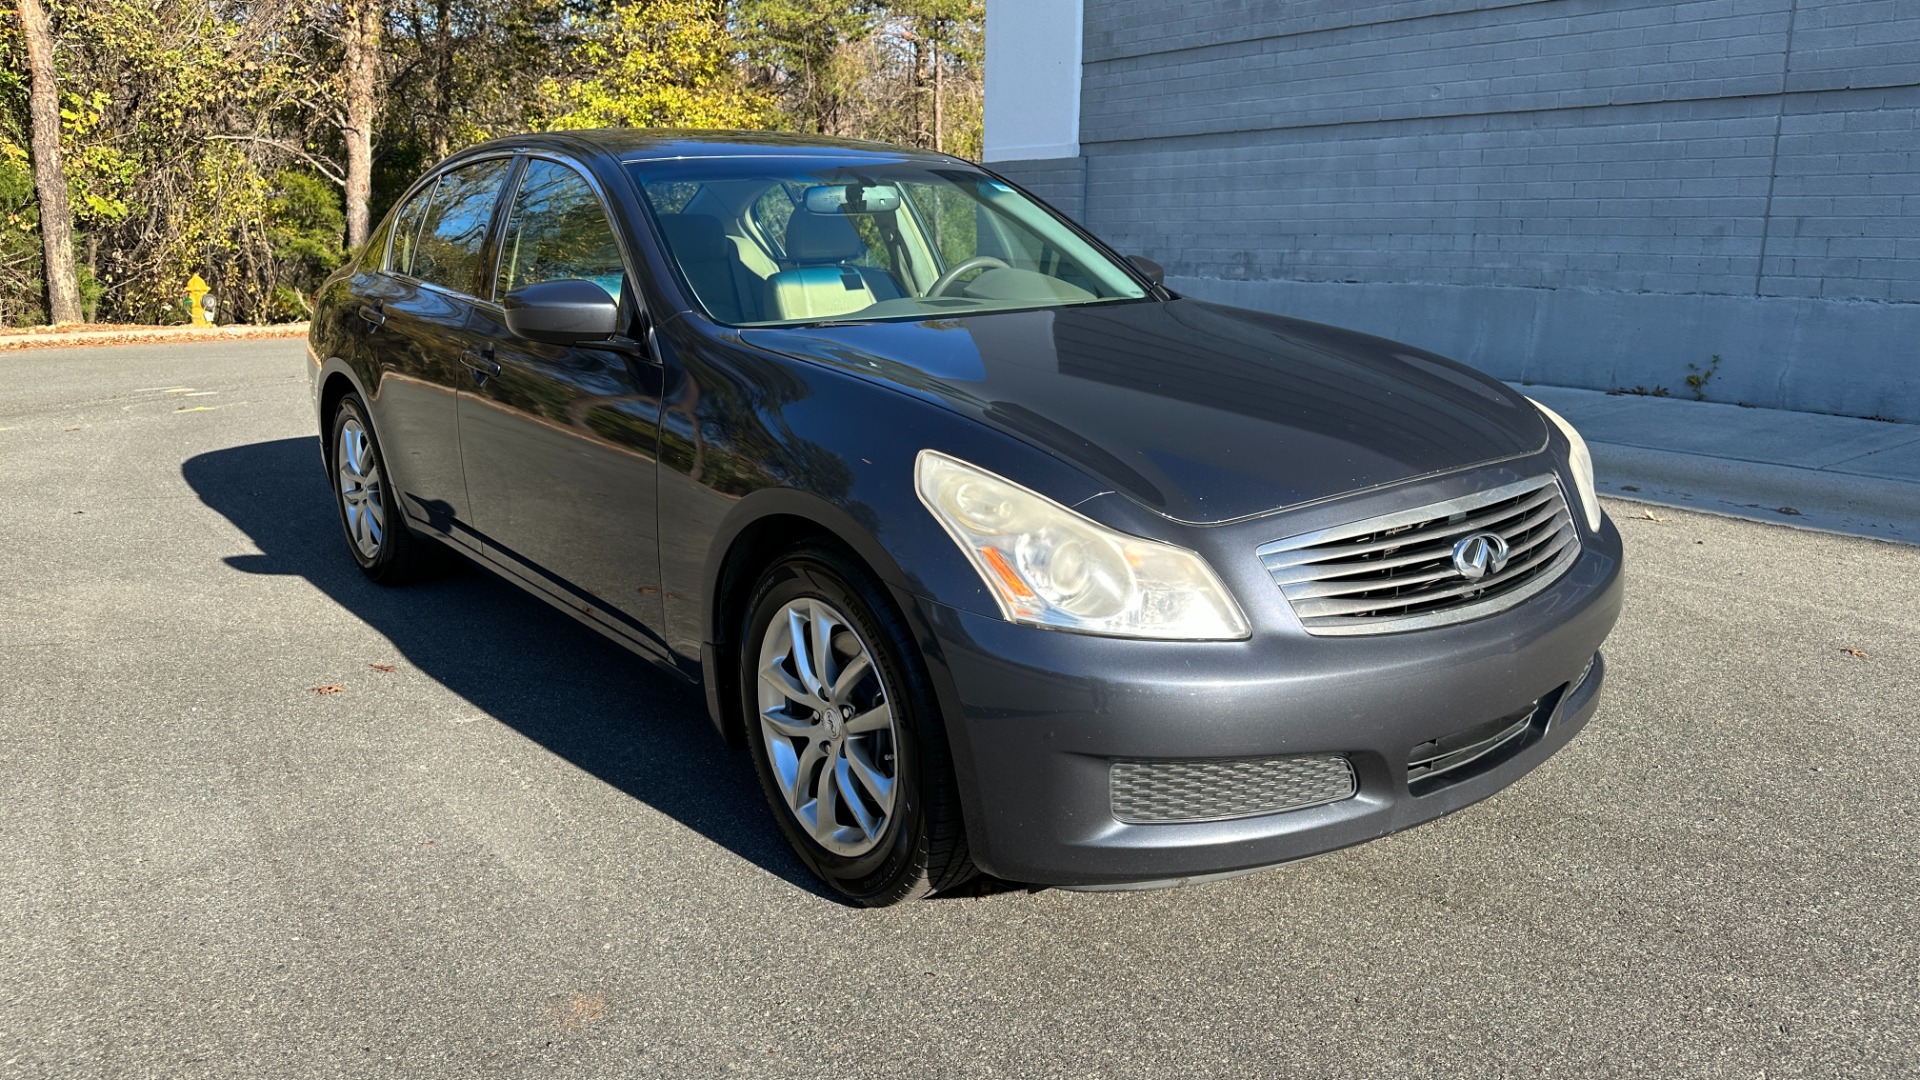 Used 2009 INFINITI G37 Sedan X / AWD / PREMIUM PACKAGE / BOSE / LEATHER / 3.7L V6 / WOOD TRIM for sale $6,798 at Formula Imports in Charlotte NC 28227 5